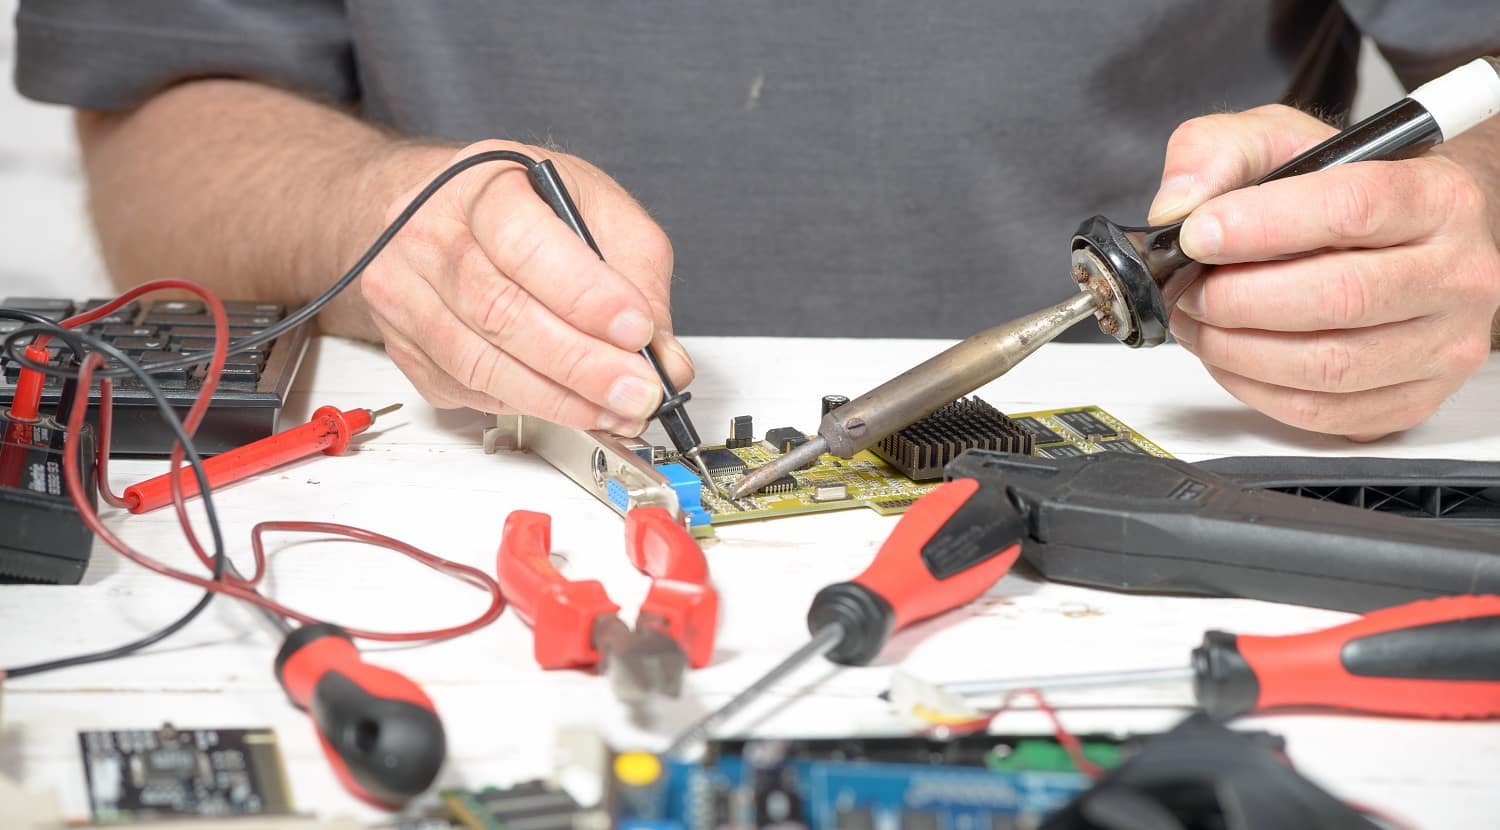 close-up of Soldering work in the computer